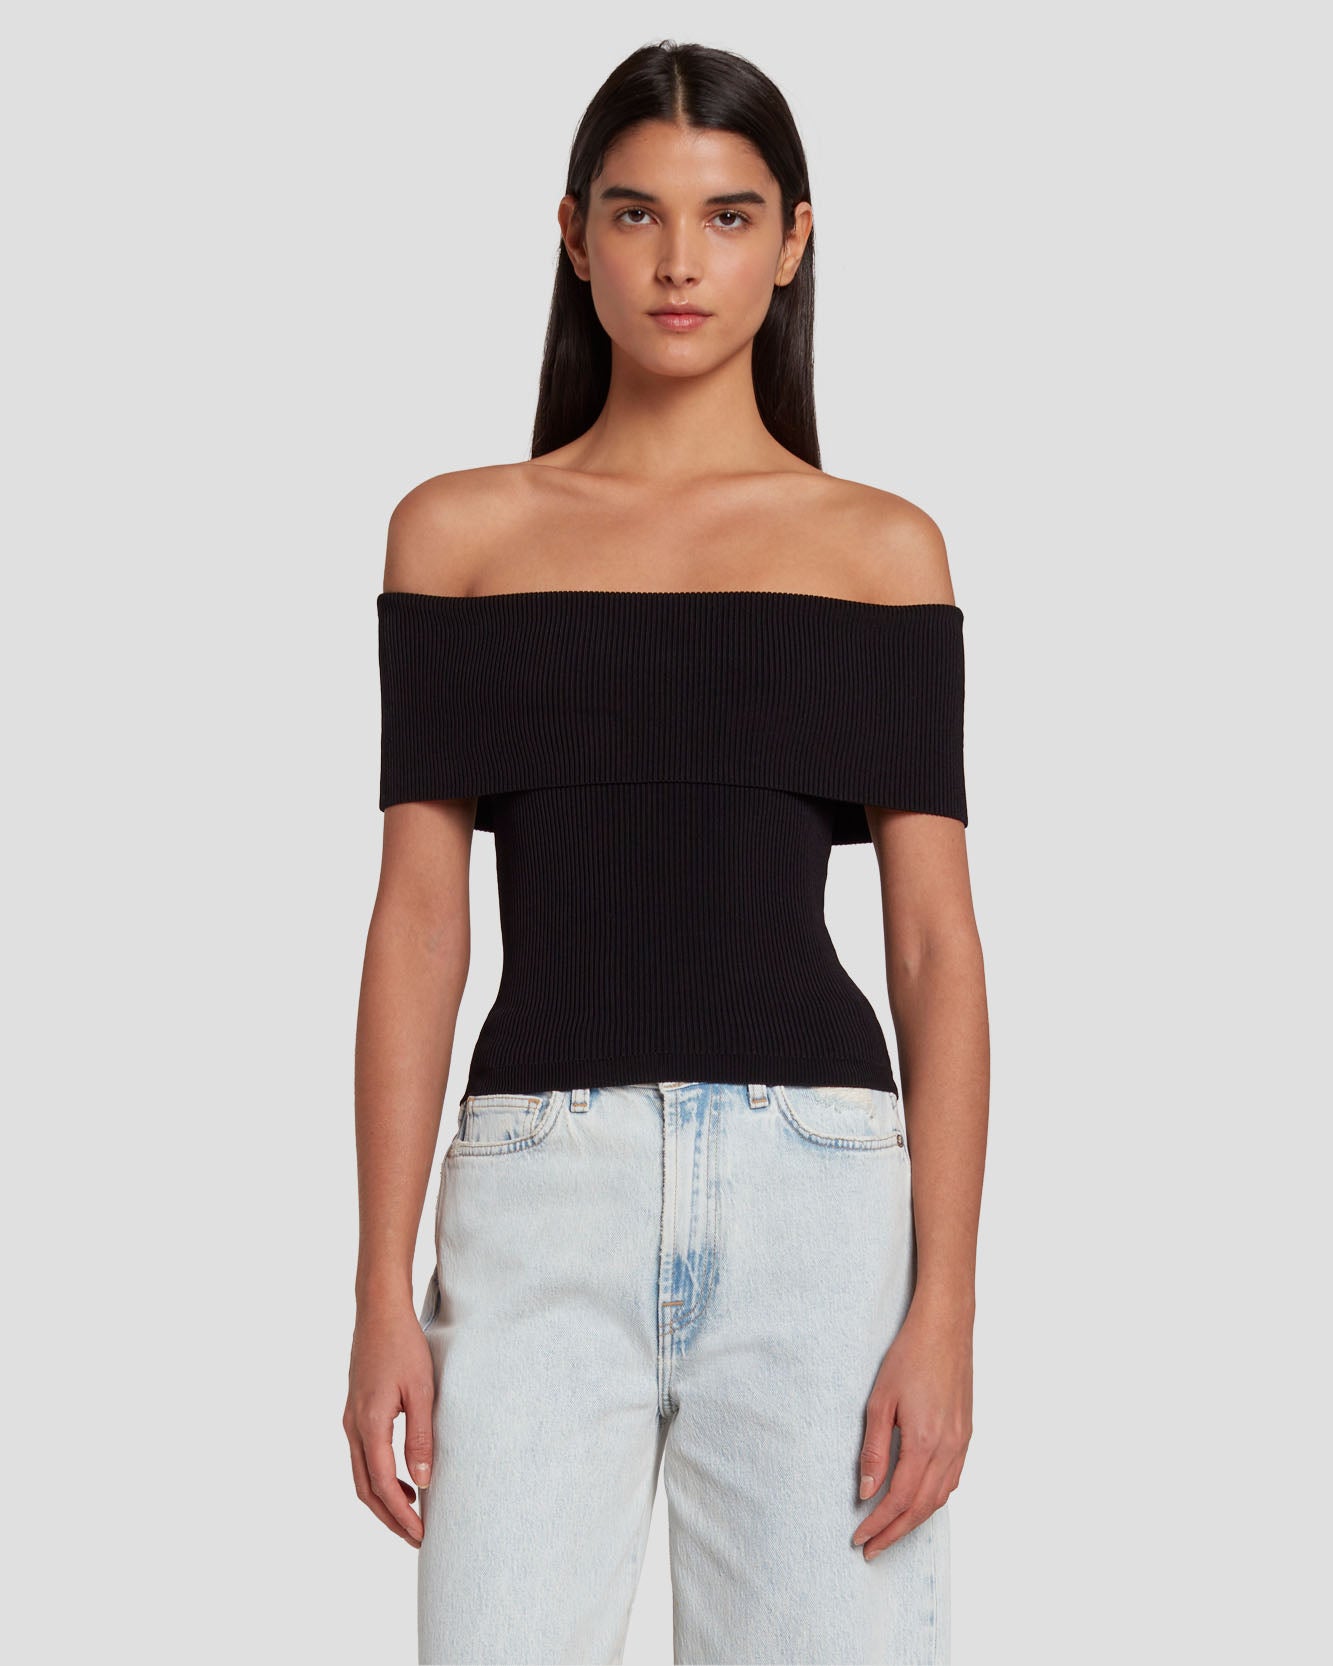 Off The Shoulder Ribbed Top in Black | 7 For All Mankind